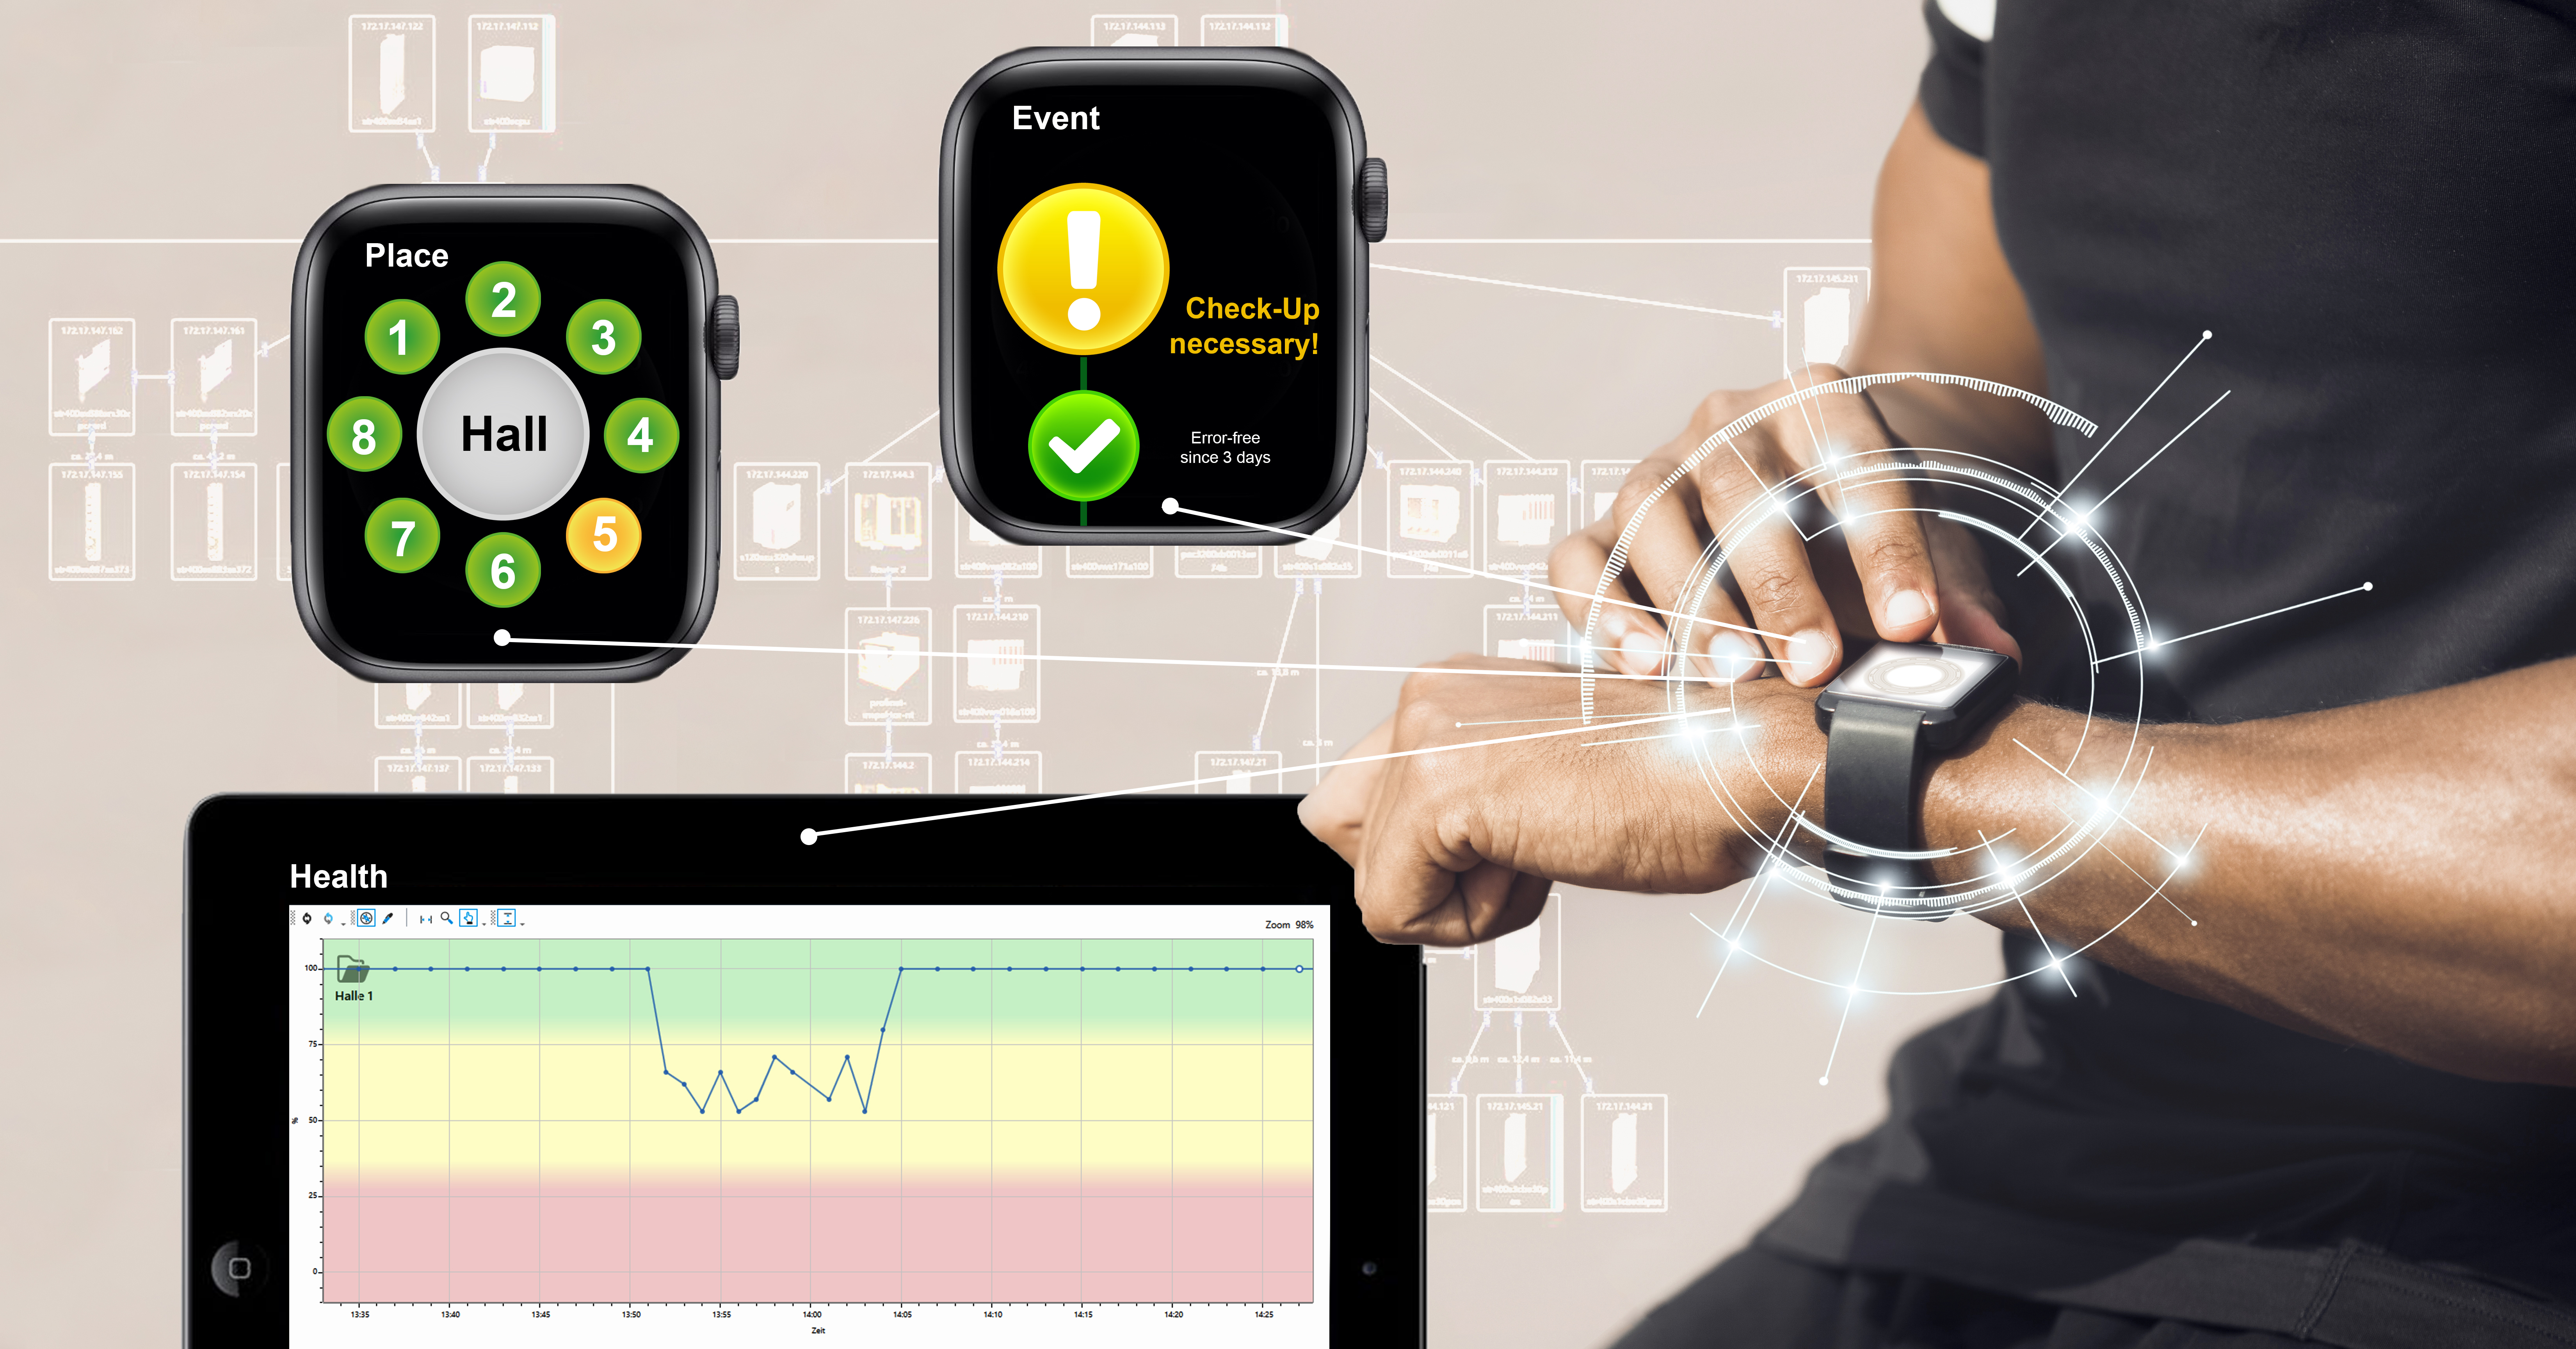 Condition Monitoring: The Fitness Tracker for OT Networks